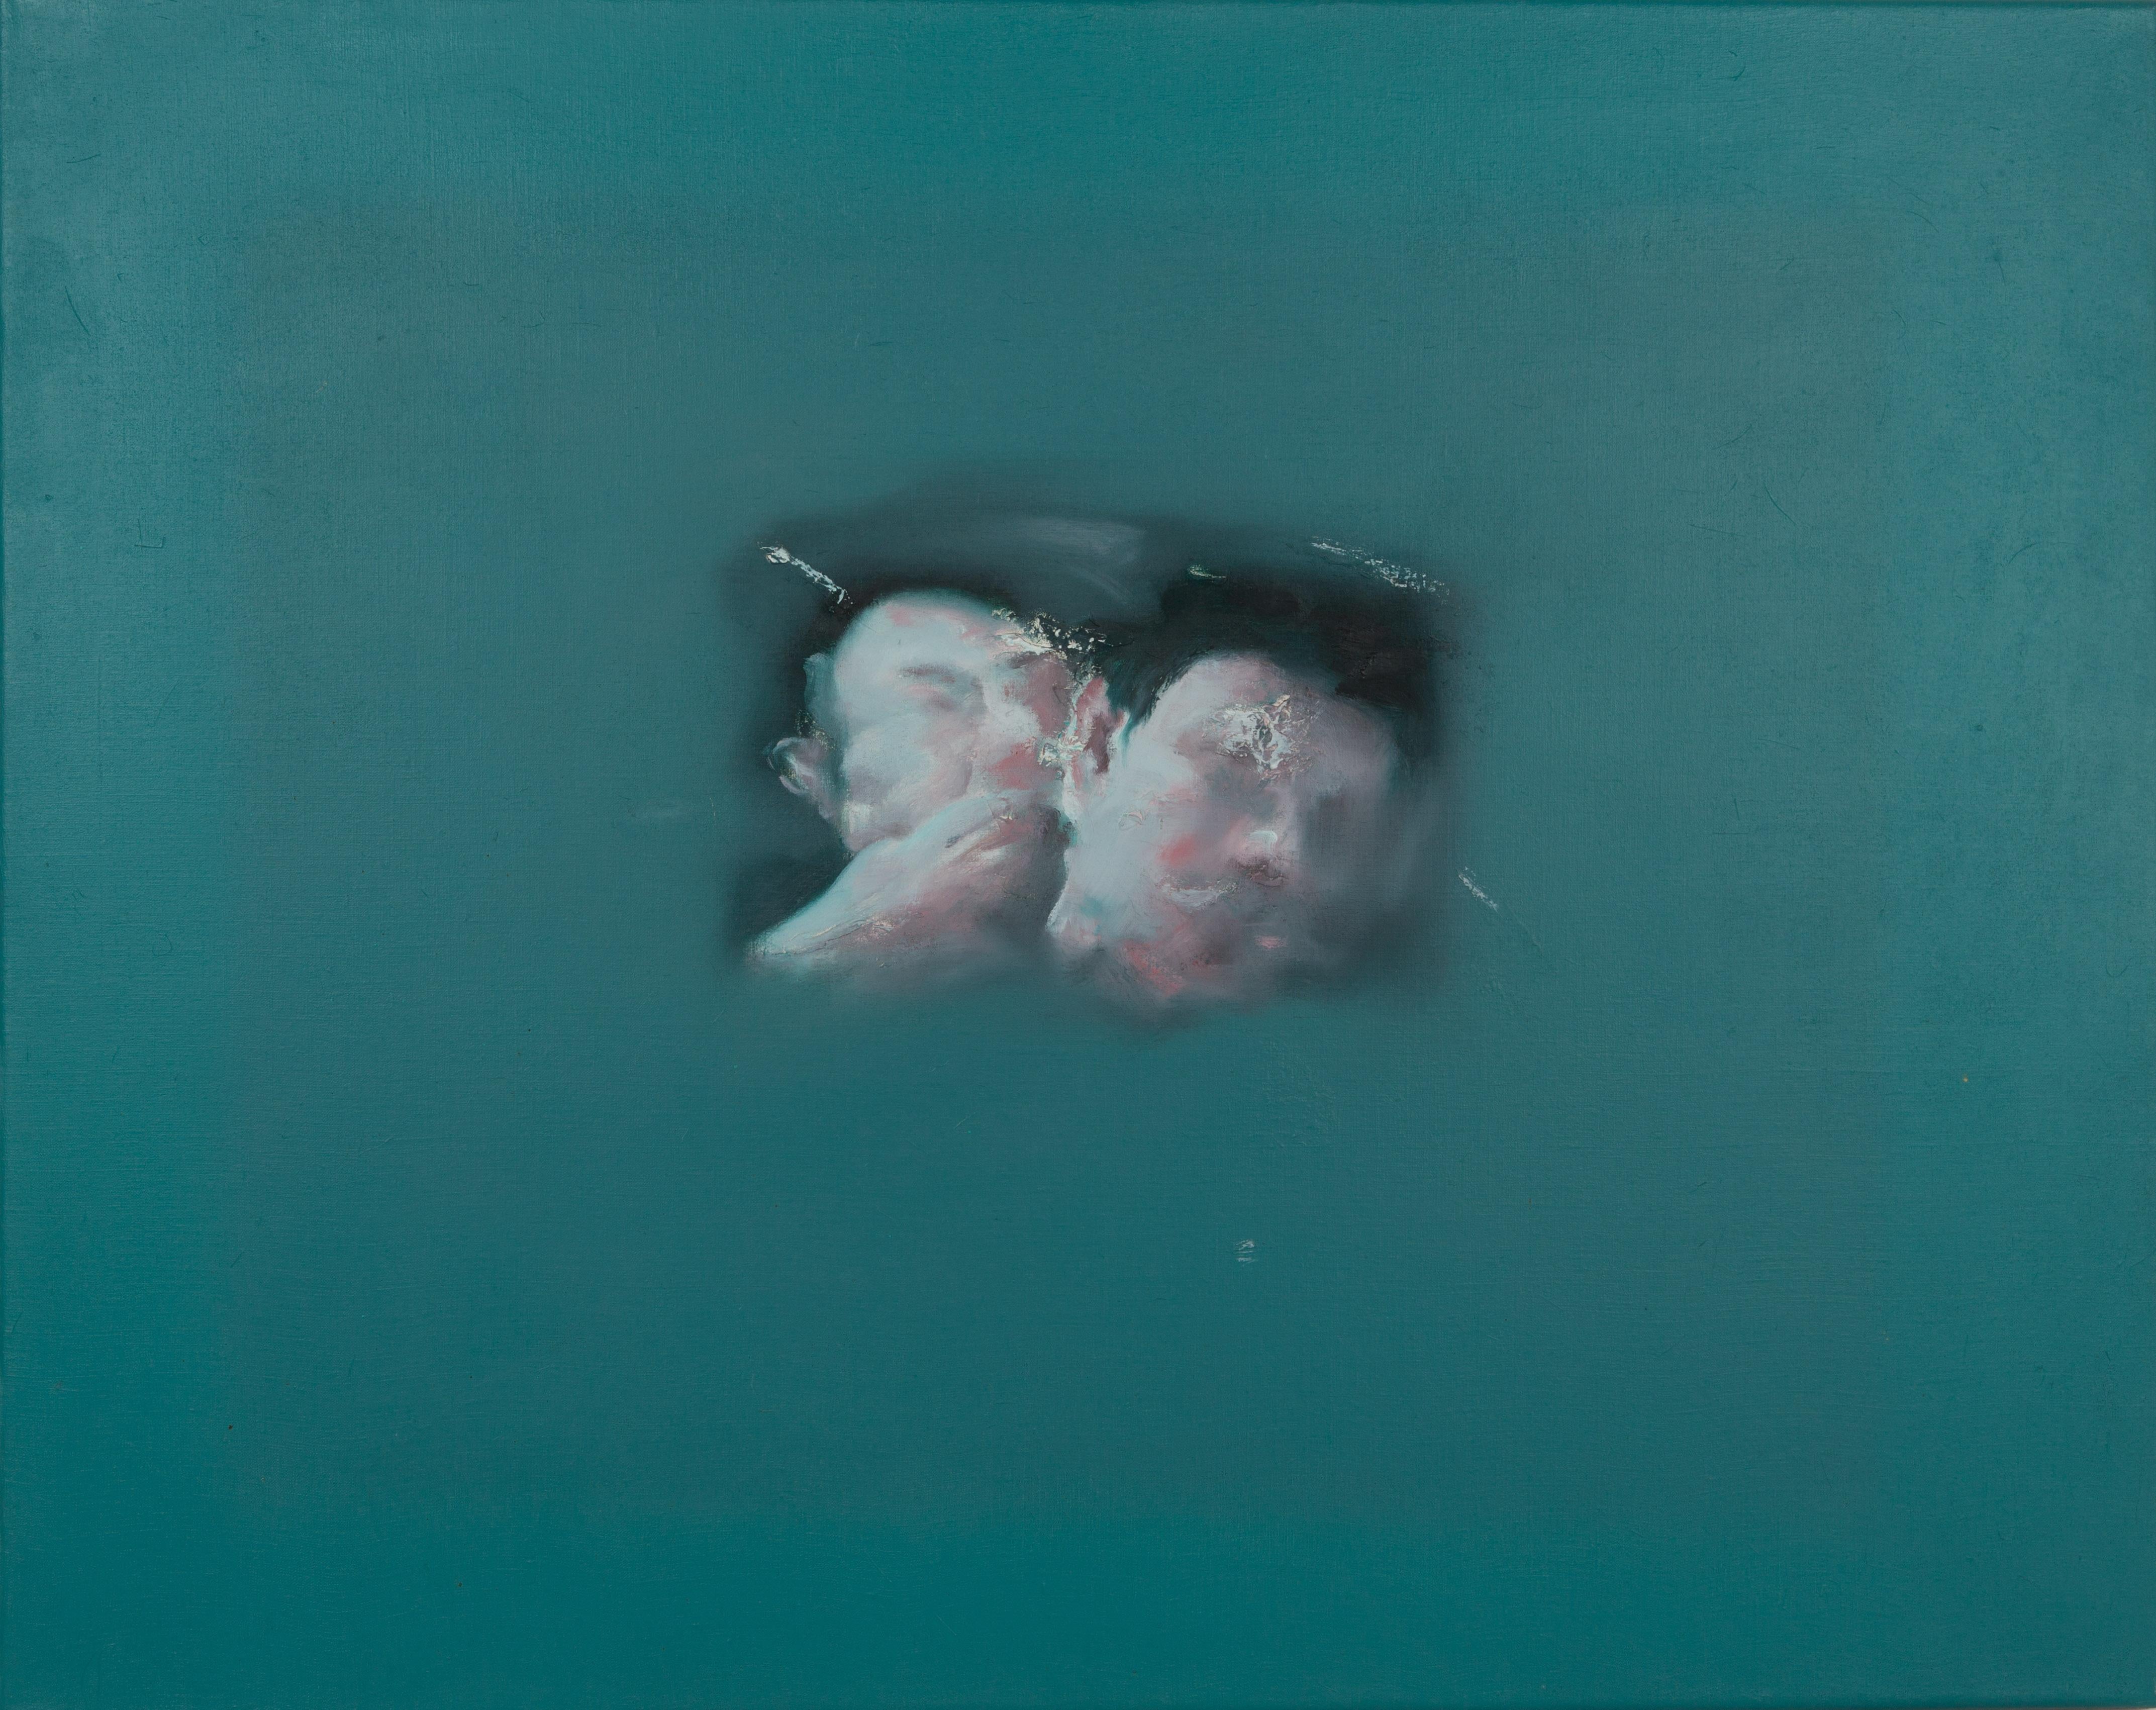 Cheng liangjie's work includes two whispering people. They are cut off from their surroundings. The image is emphasized by multiple frames painted in different shades of green. The viewer feels himself to be a voyeur breaking into the intimacy of